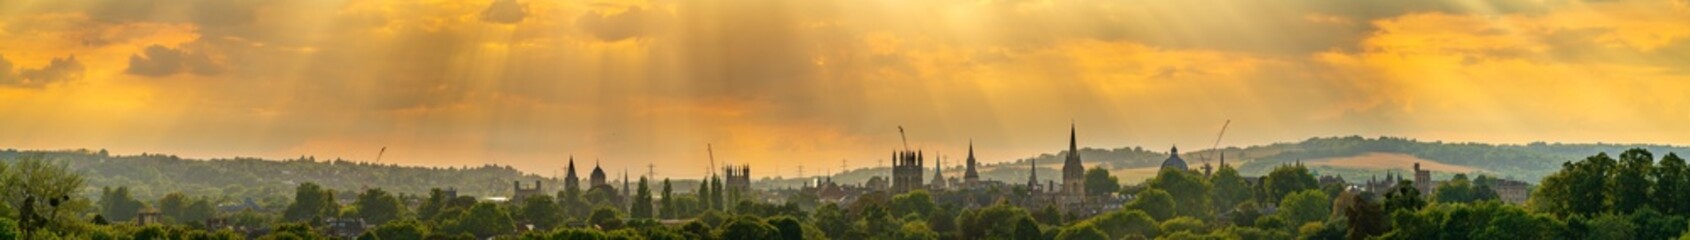 Skyline rooftop panorama of Oxford city in England